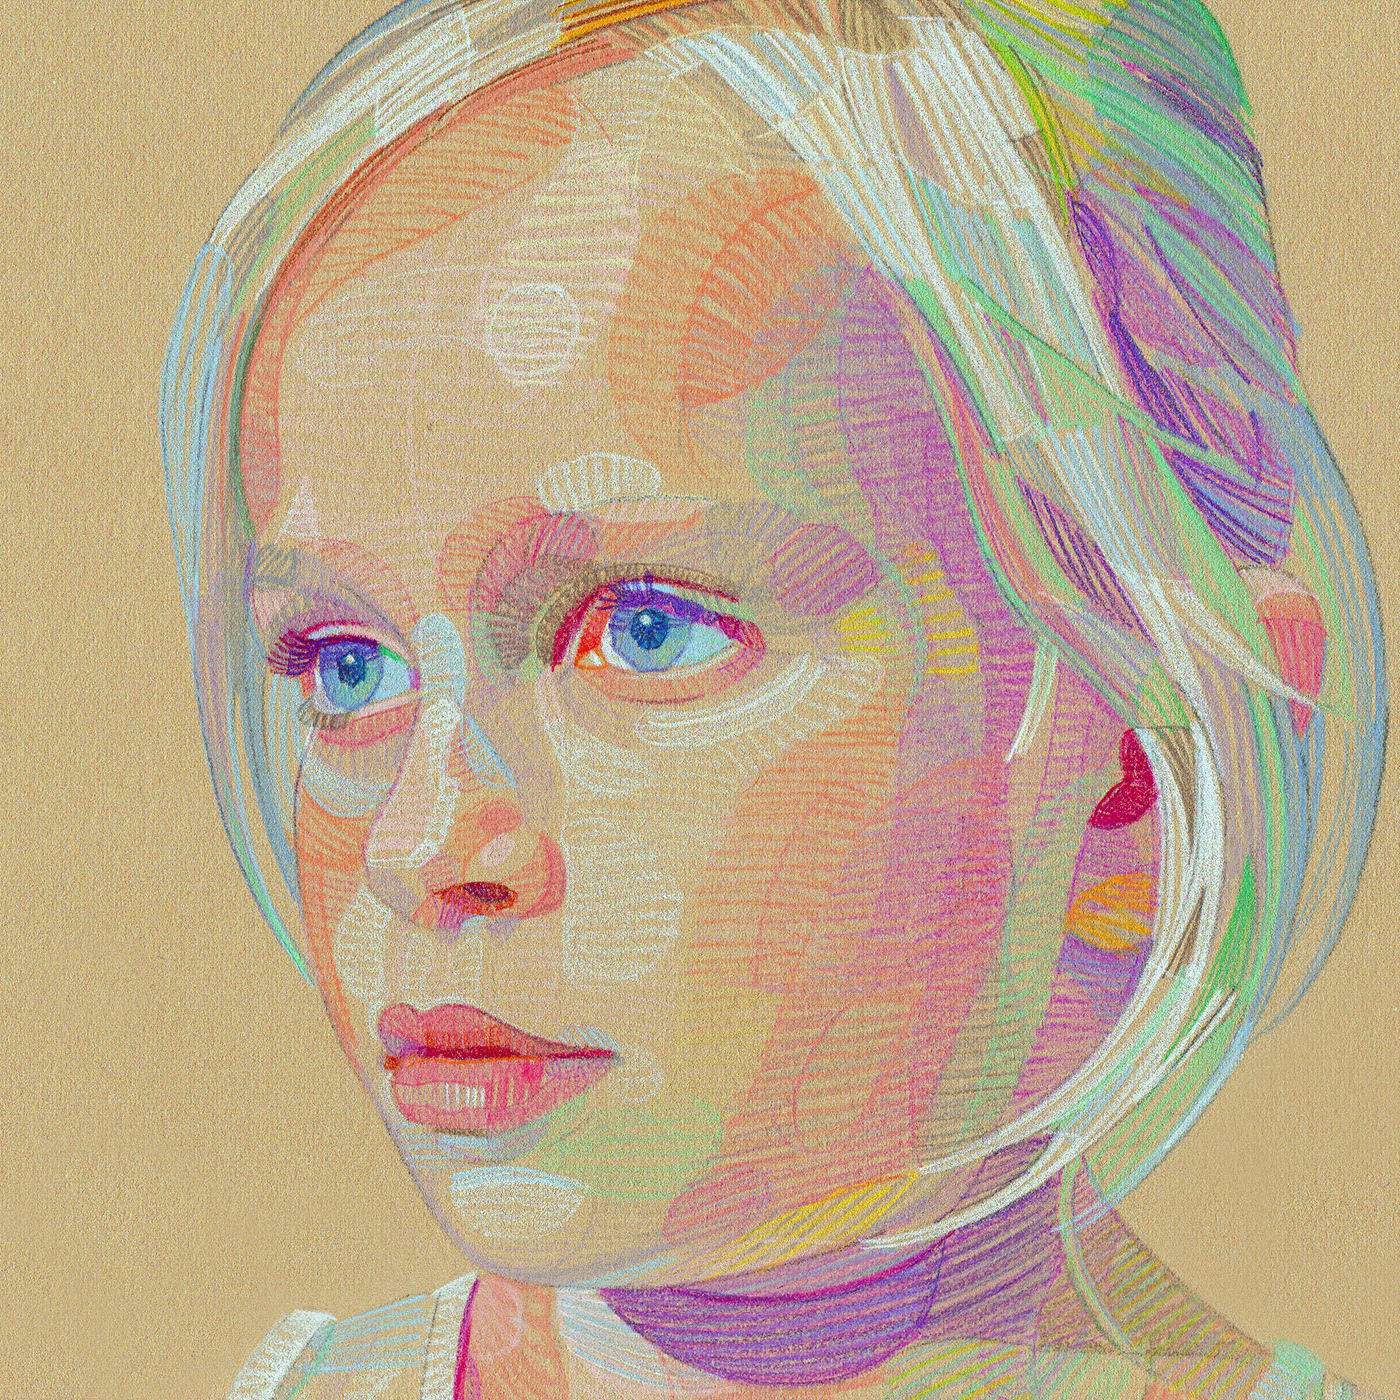 Linear Thinking Series: Colored Pencil Illustrations